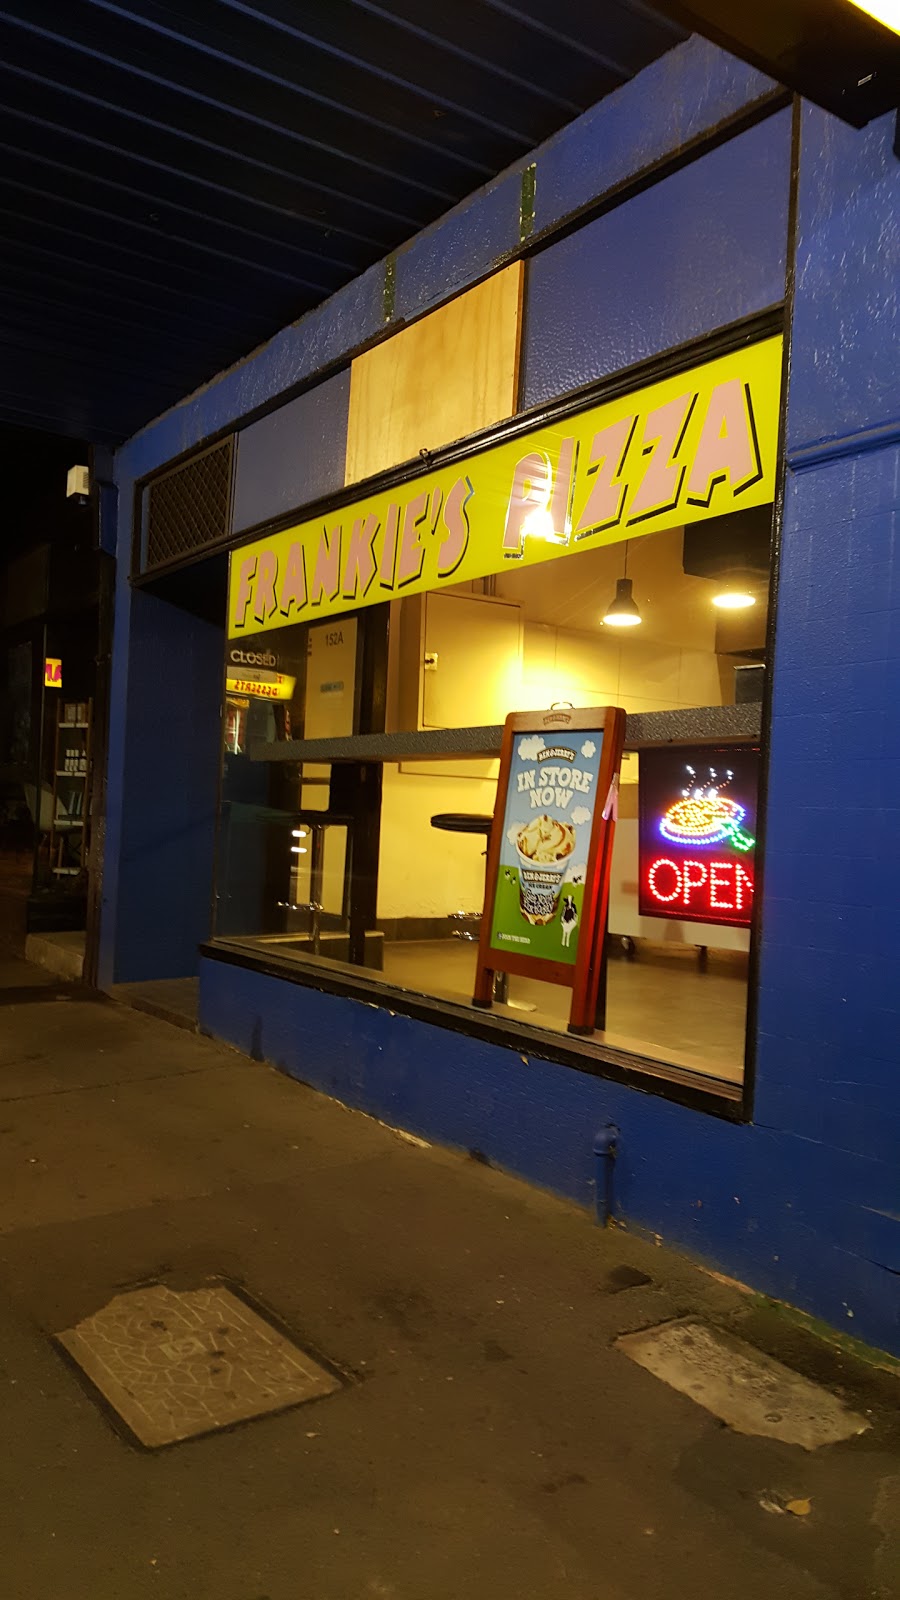 Frankies Pizza | meal delivery | 152A Epsom Rd, Ascot Vale VIC 3032, Australia | 0393707222 OR +61 3 9370 7222